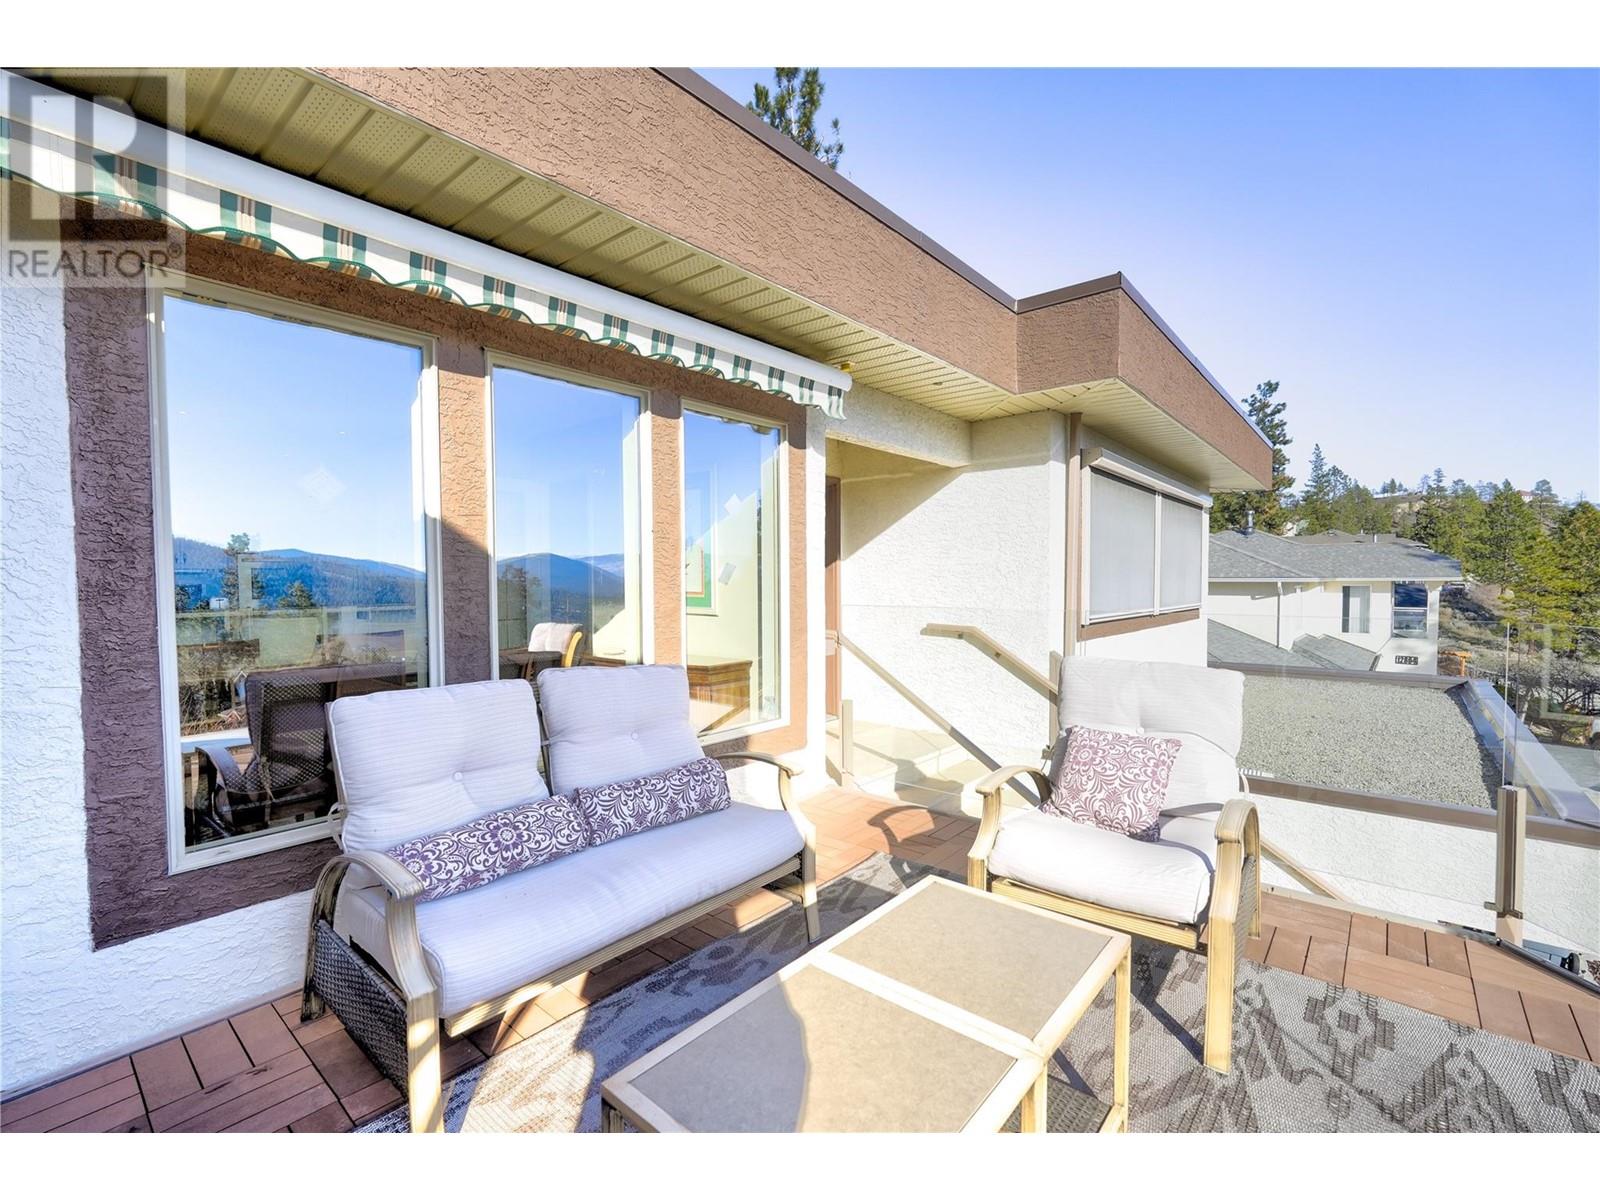  12808 Mclarty Place, Summerland